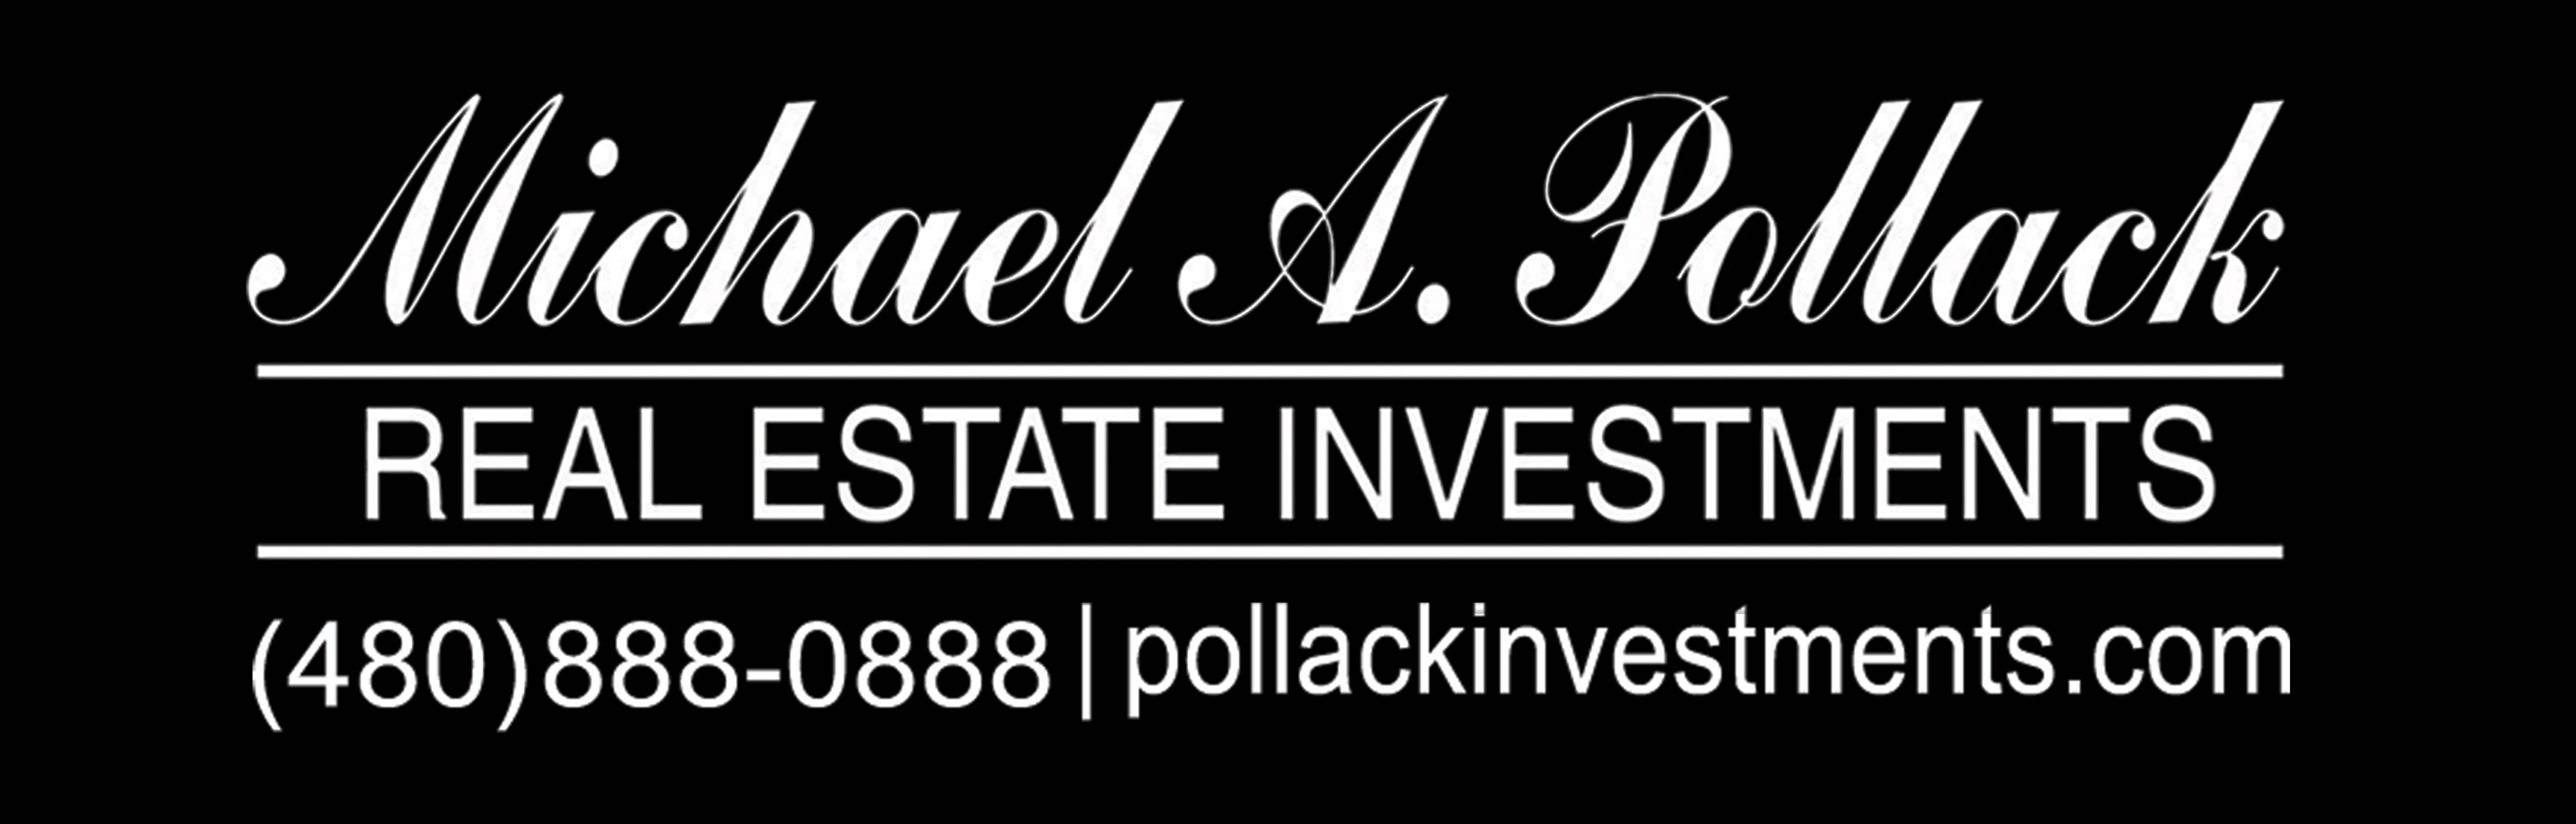 Pollack Investments